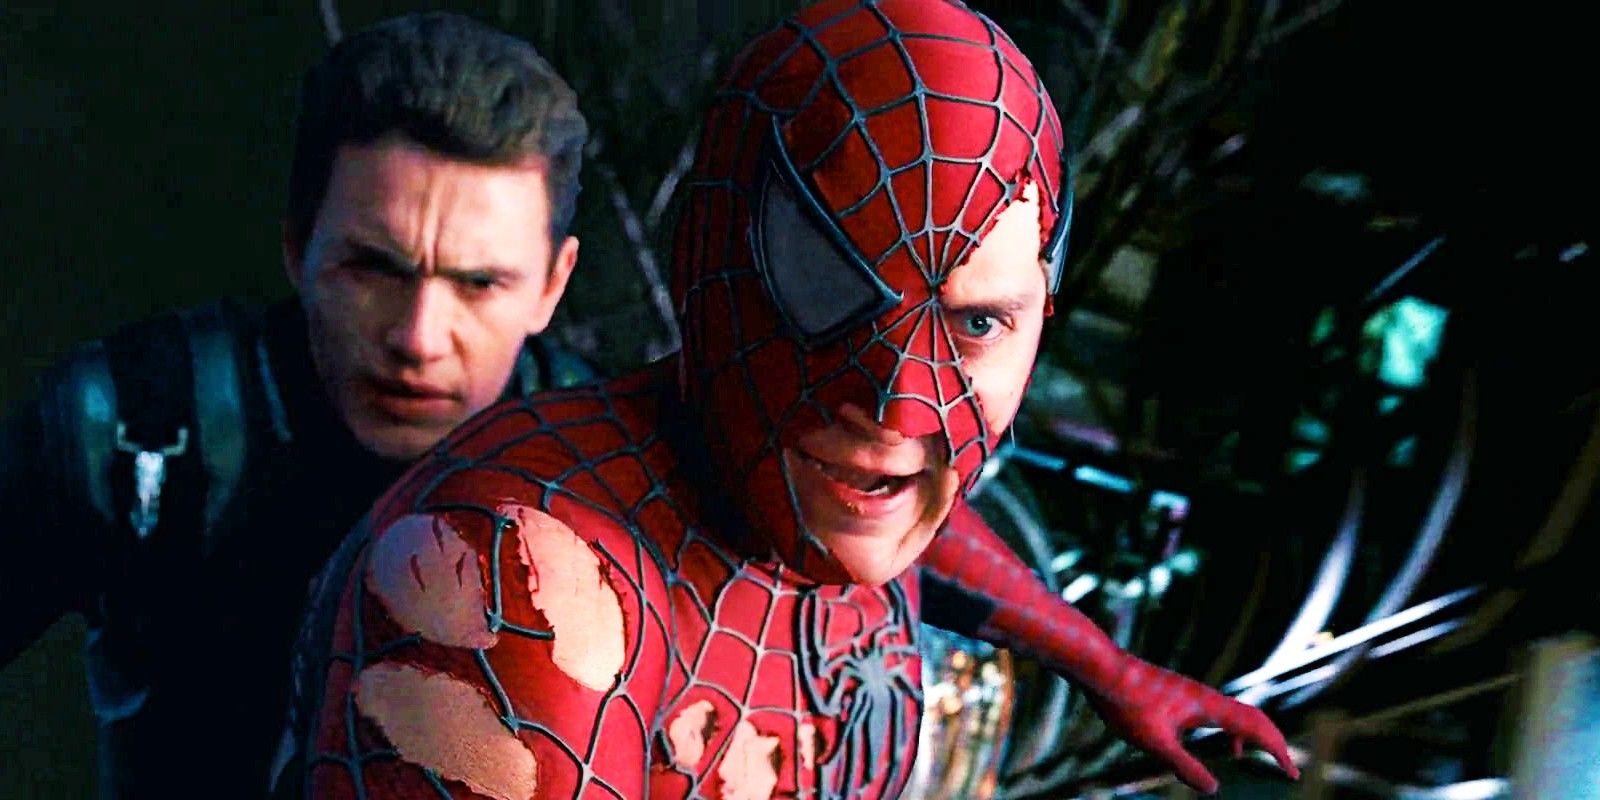 Tobey Maguire as Spider-Man With His Suit All Torn Up James Franco As Green Goblin Standing Behind Him In Spider-Man 3